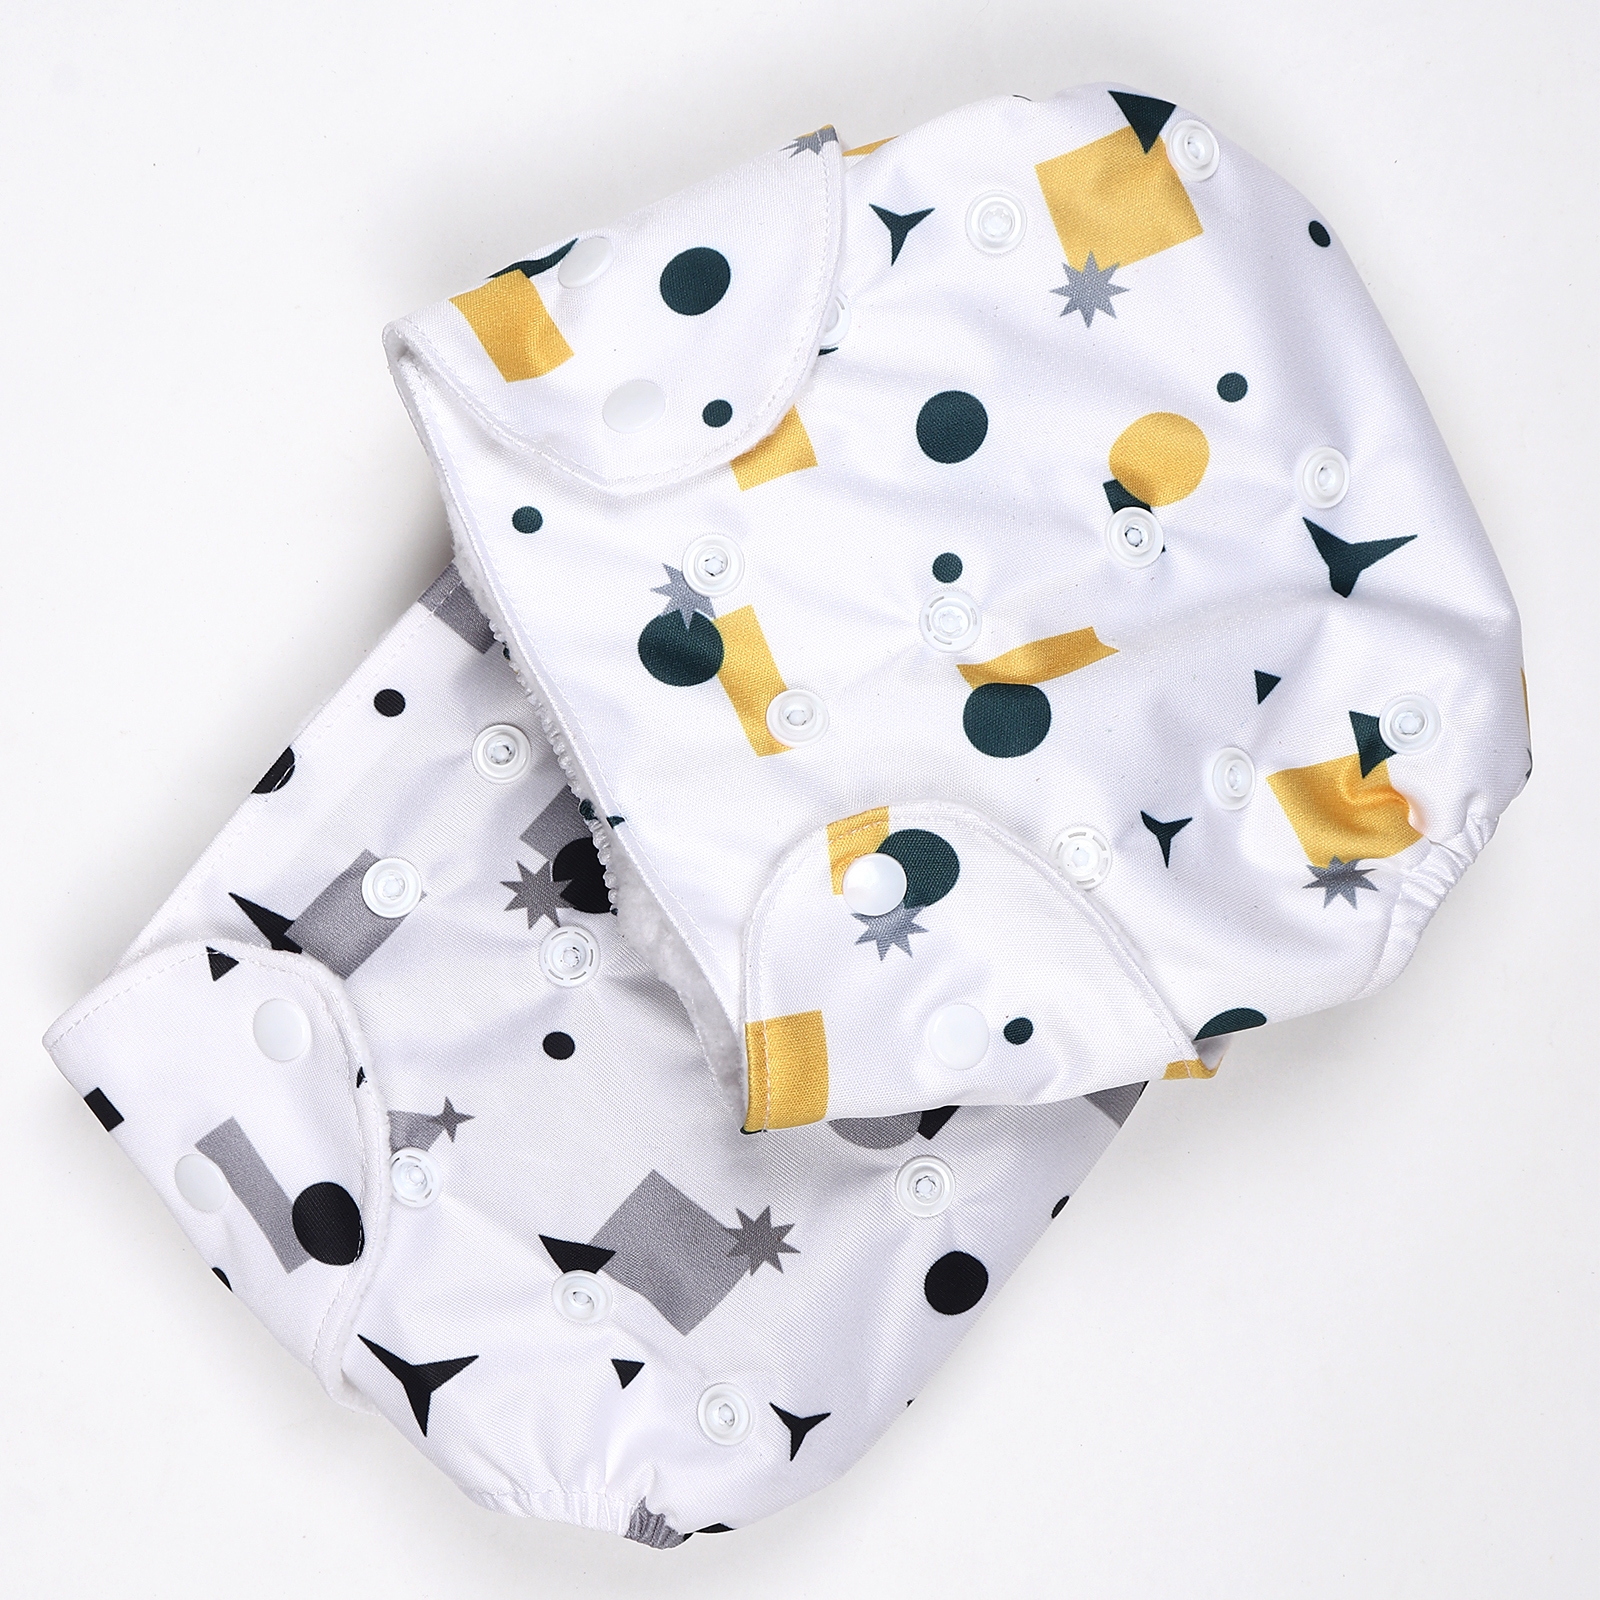 Kidbea | Kidbea Baby's All in One Washable Reusable Adjustable Cloth 2 Diapers with 2 Inserts -Reusable and Washable Cloth Diaper